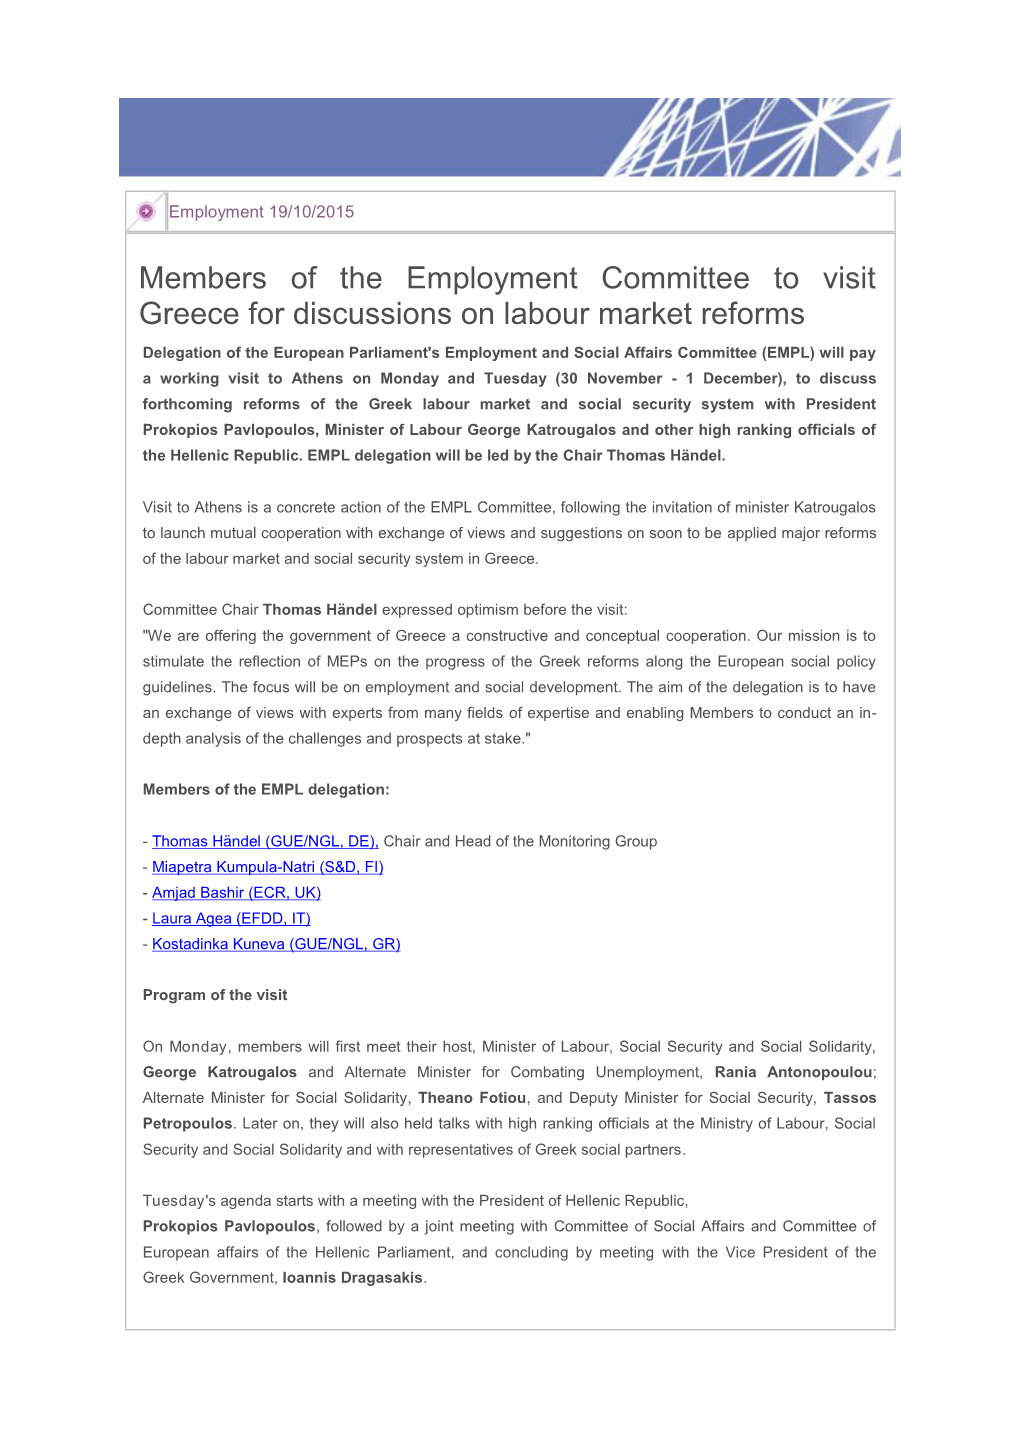 Members of the Employment Committee to Visit Greece For